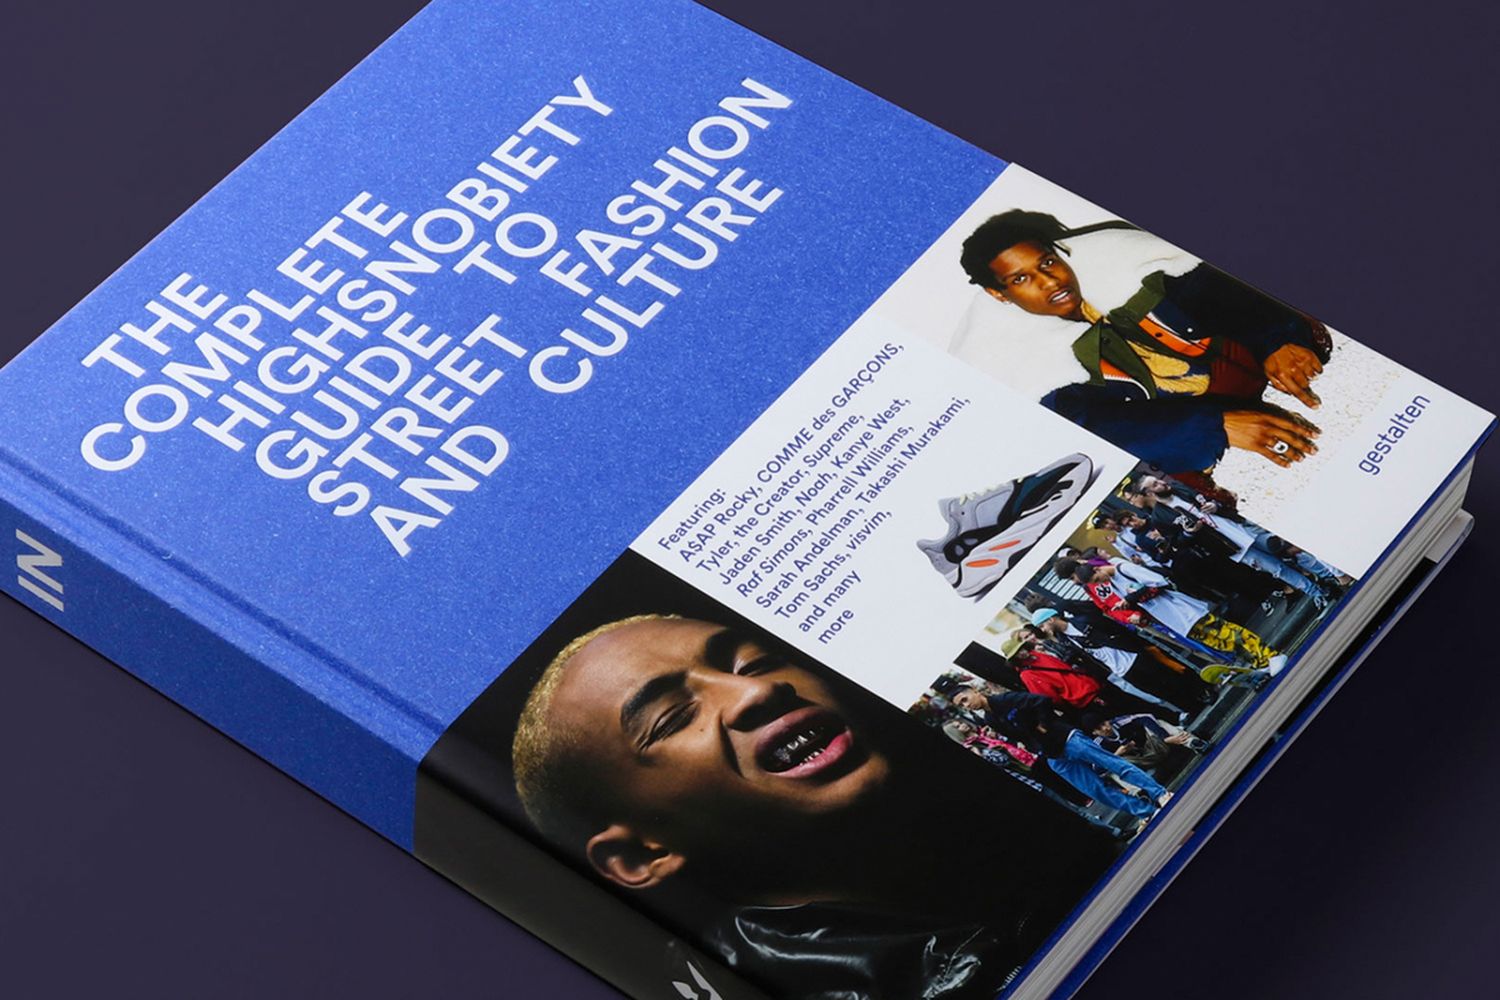 The Incomplete Highsnobiety Guide To Street Fashion & Culture